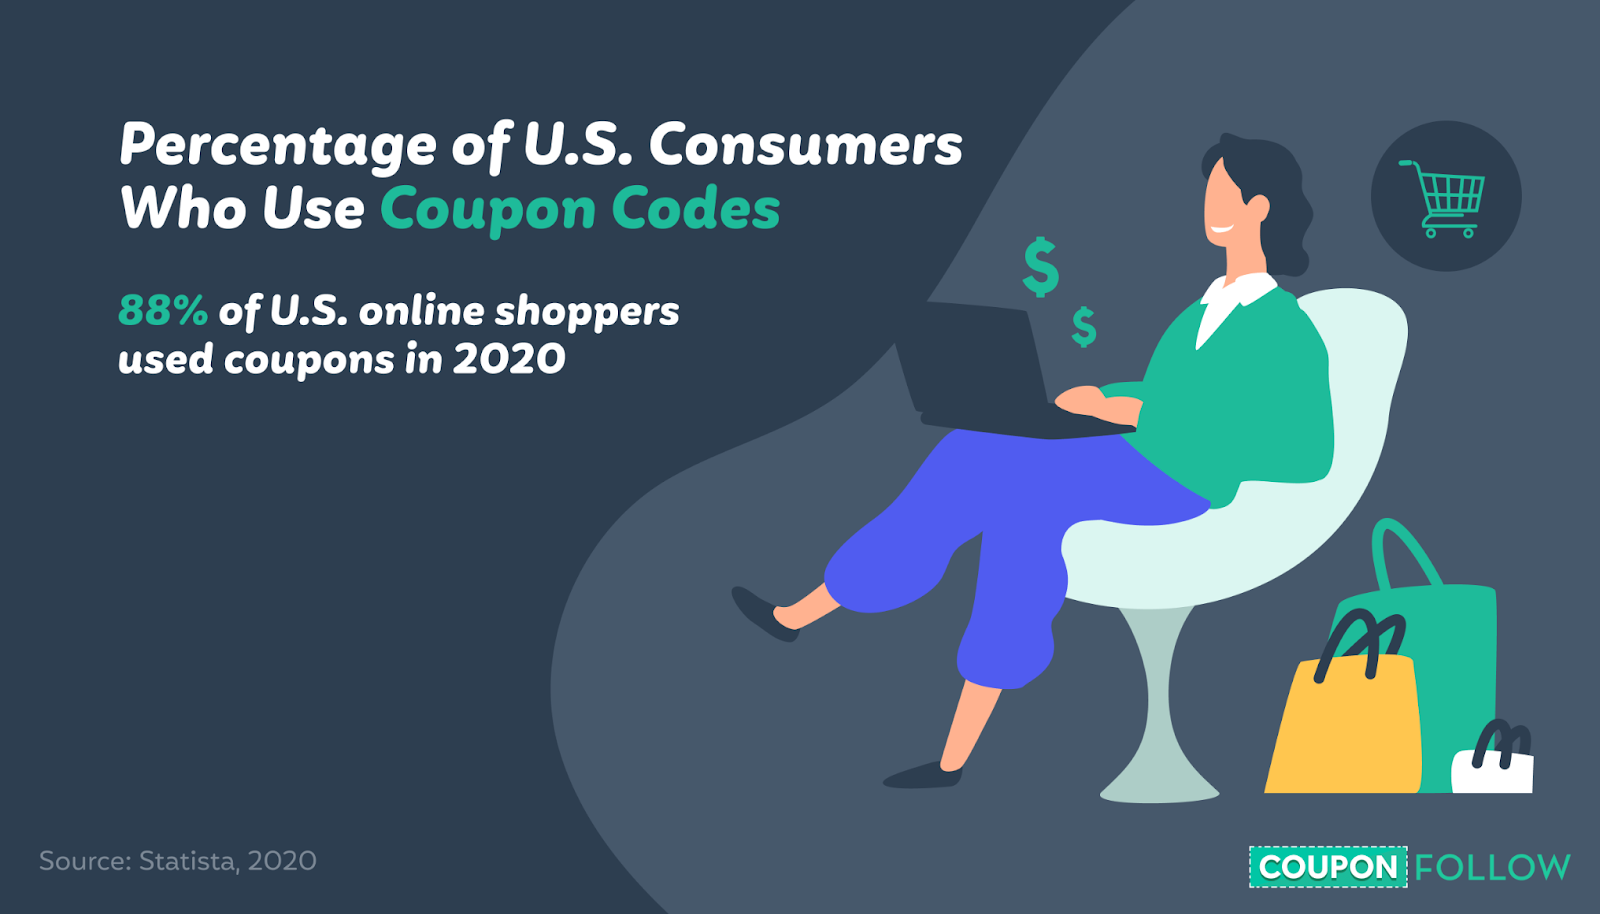  image showing the percentage of US consumers who use coupon codes